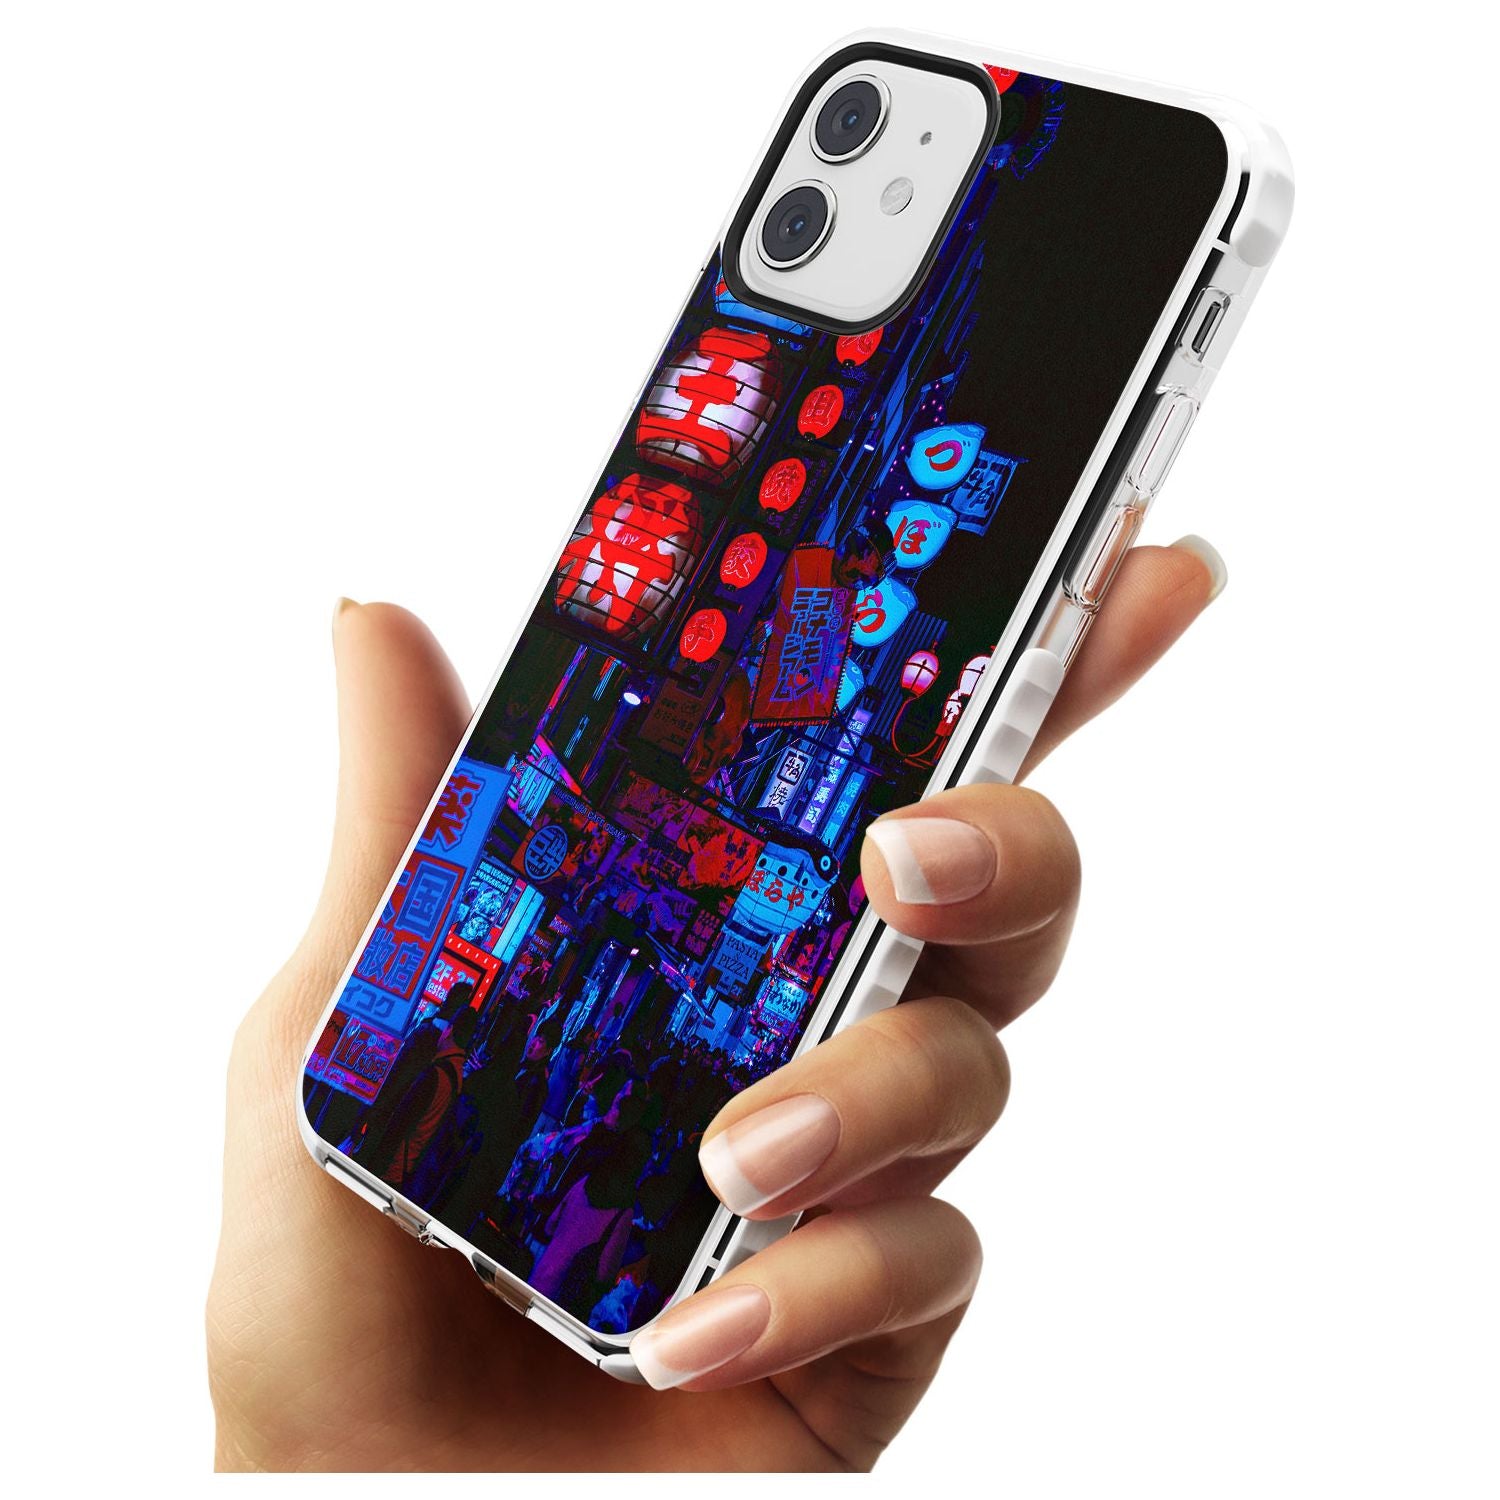 Red & Turquoise - Neon Cities Photographs Impact Phone Case for iPhone 11